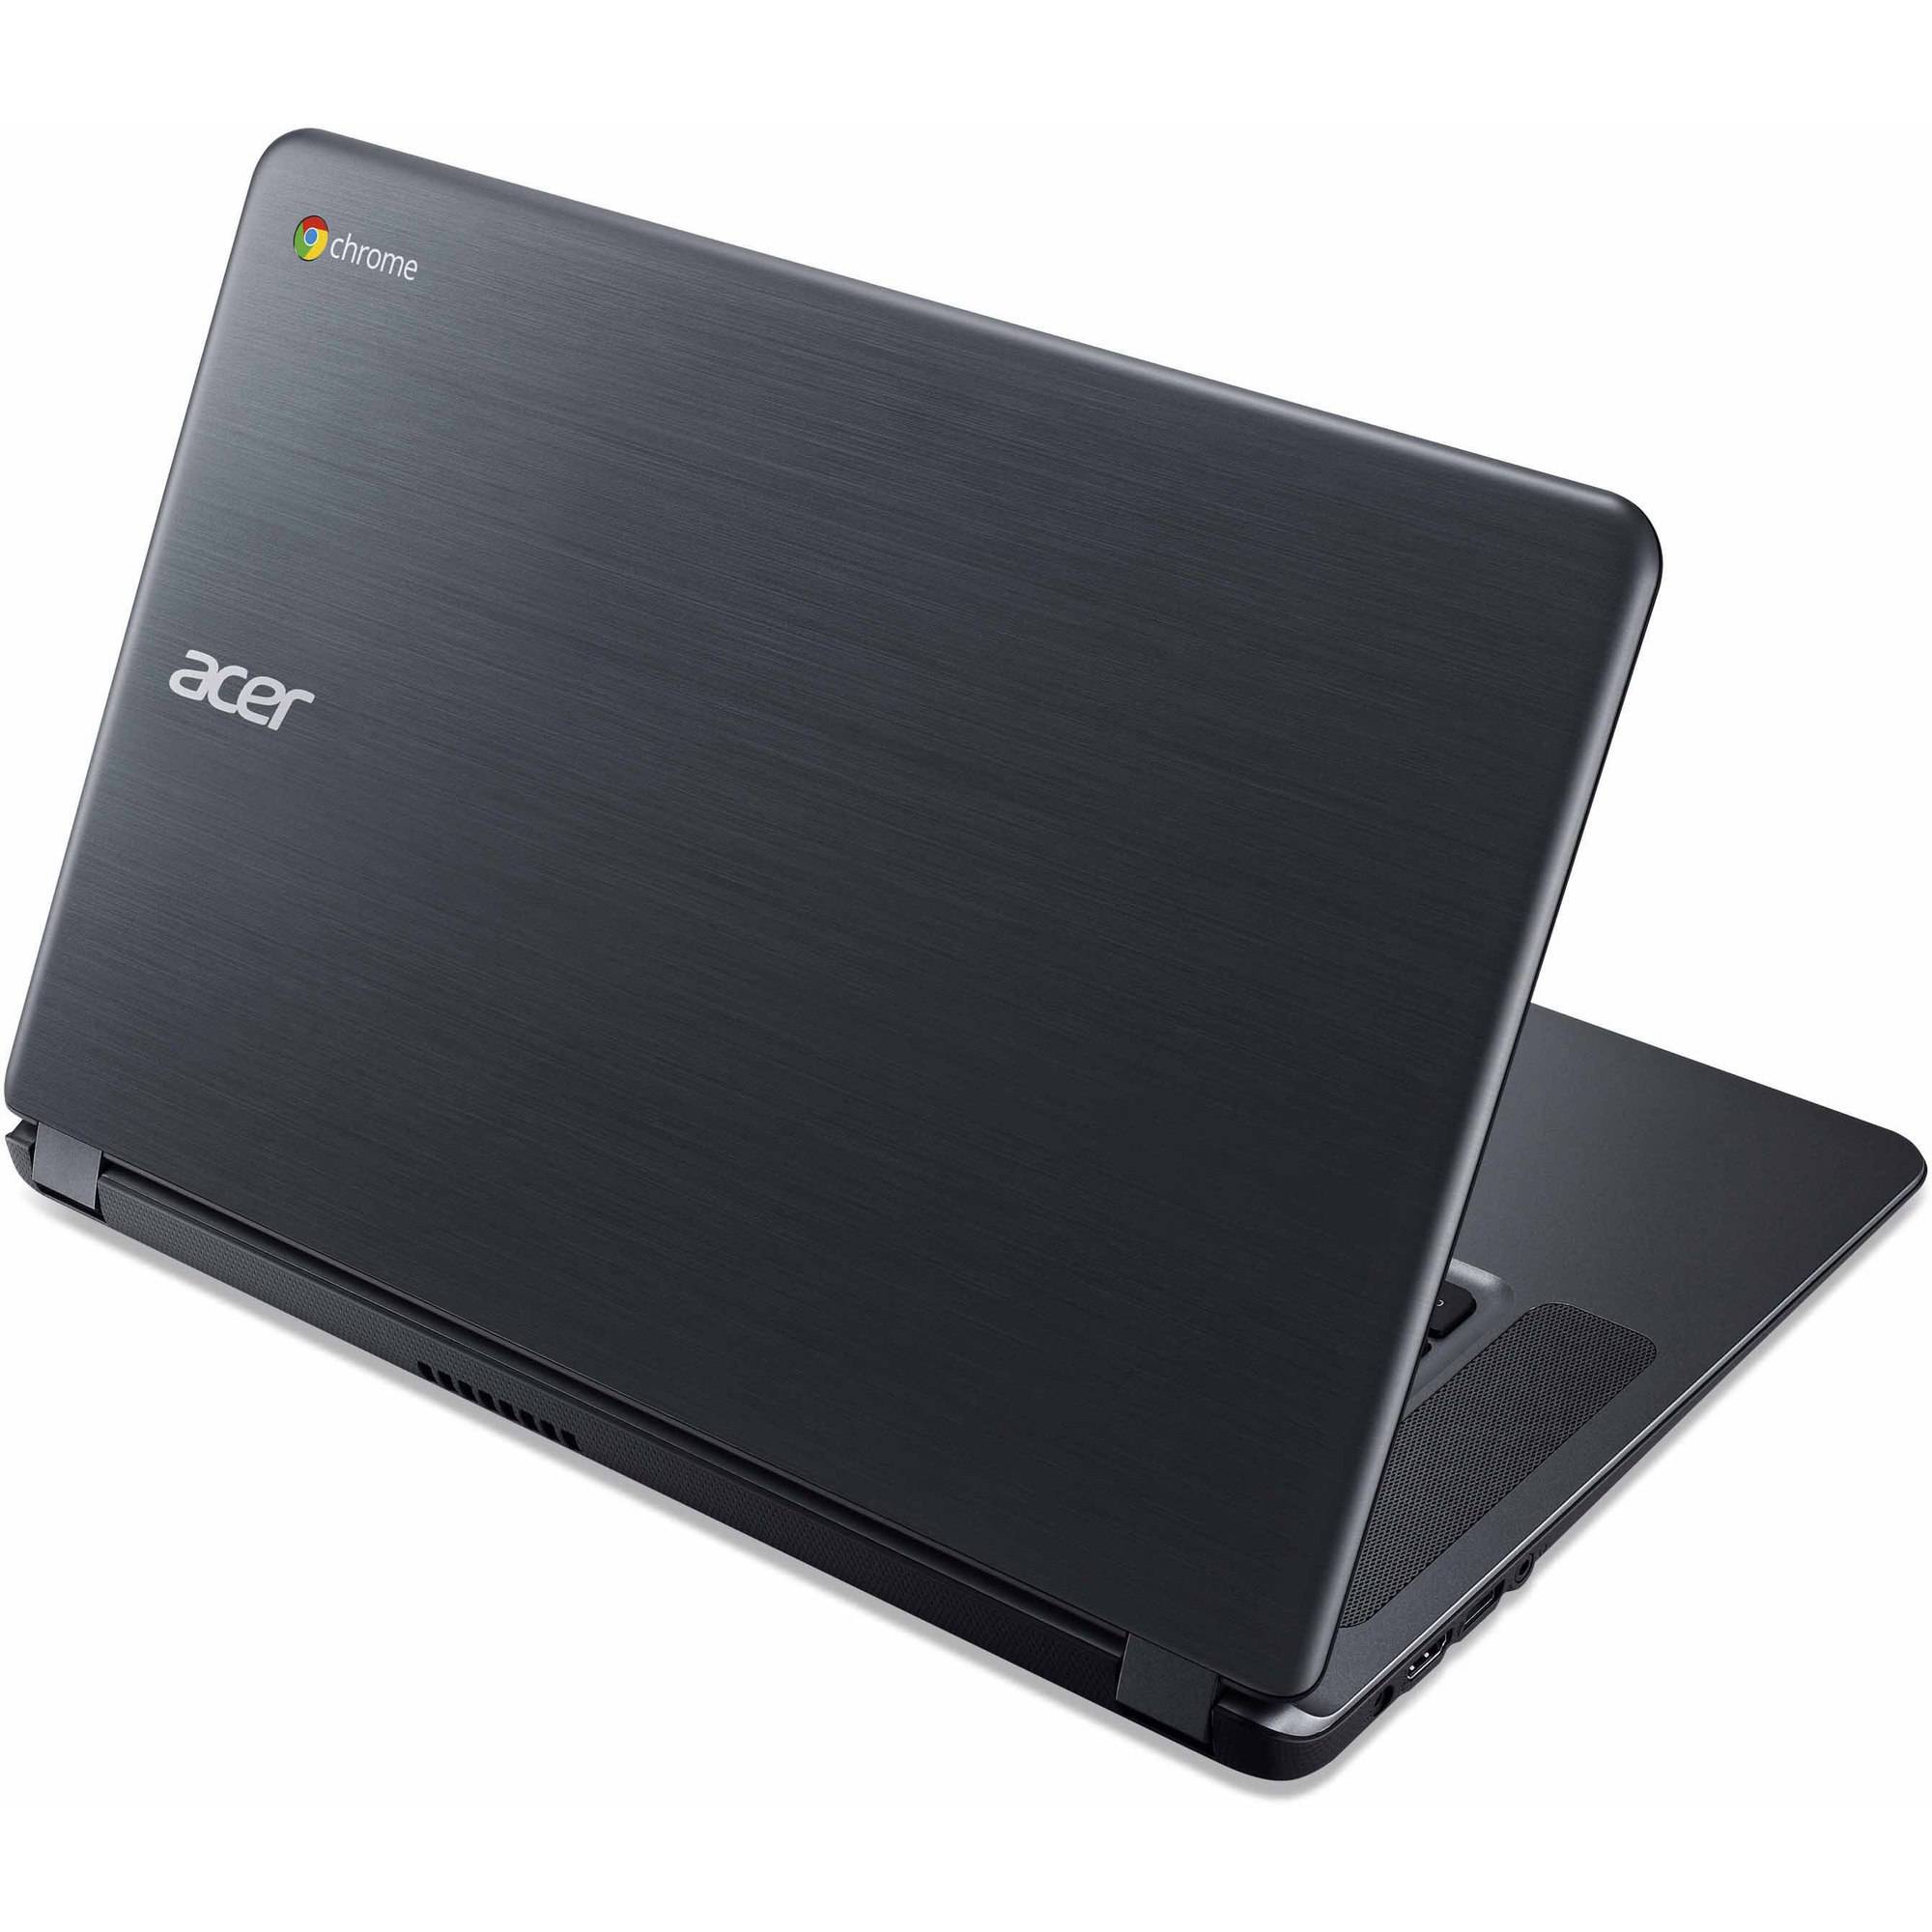 Acer Granite Gray 15.6" CB3-531-C4A5 Chromebook PC with Intel Celeron N2830 Dual-Core Processor, 2GB Memory, 16GB Hard Drive and Chrome OS - image 5 of 9